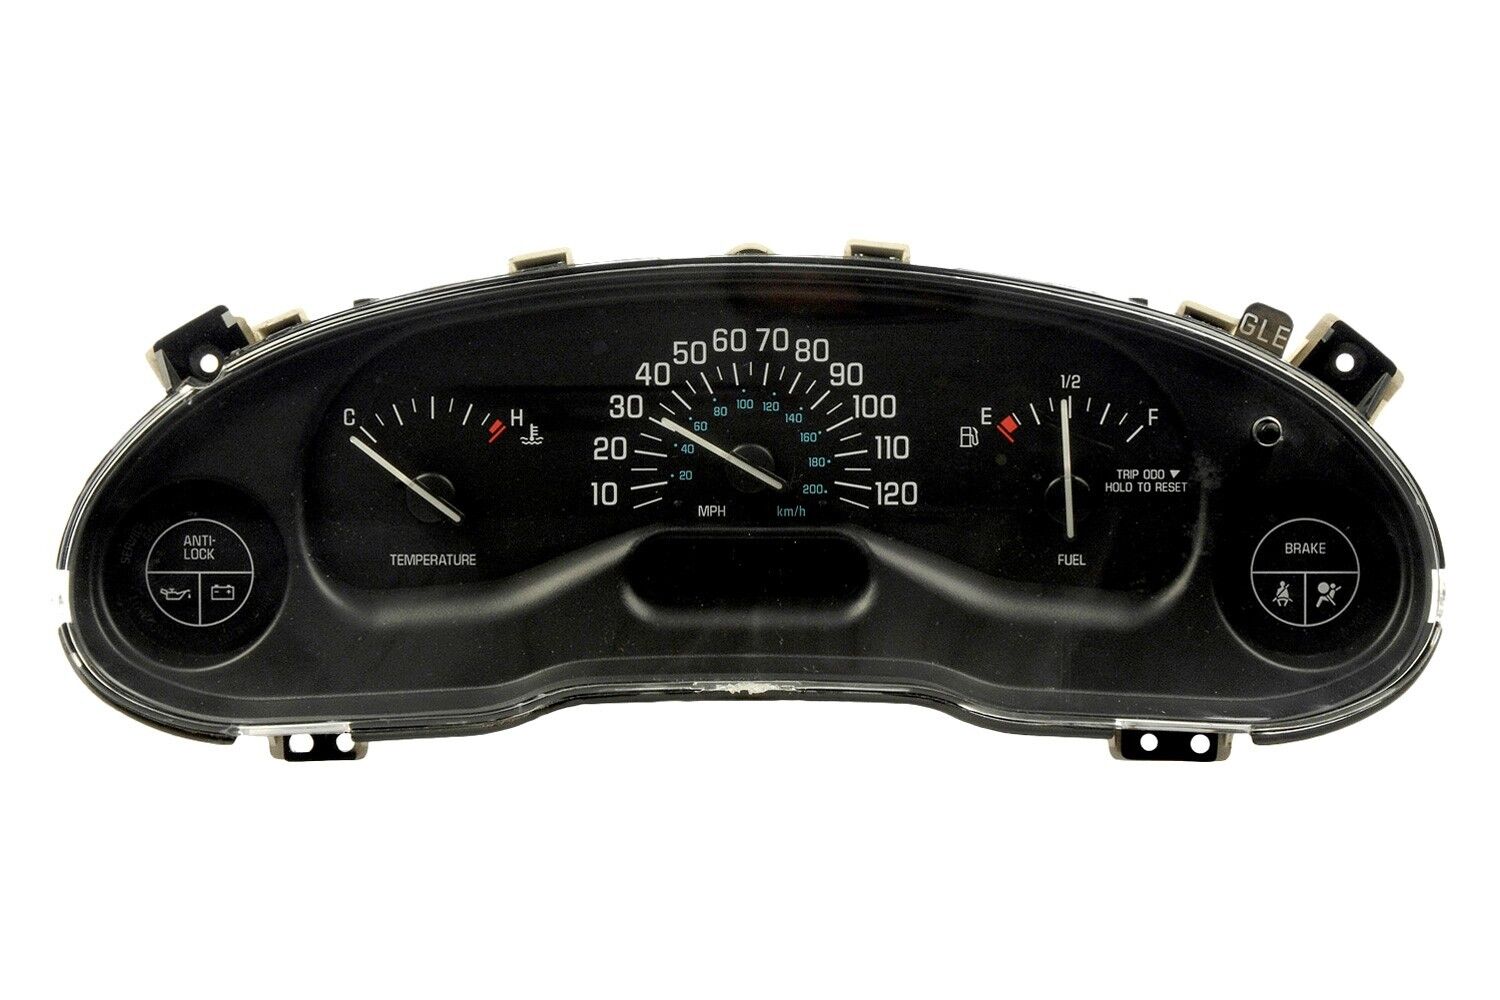 Buick instrument Cluster. W166 instrument Cluster Replacement.